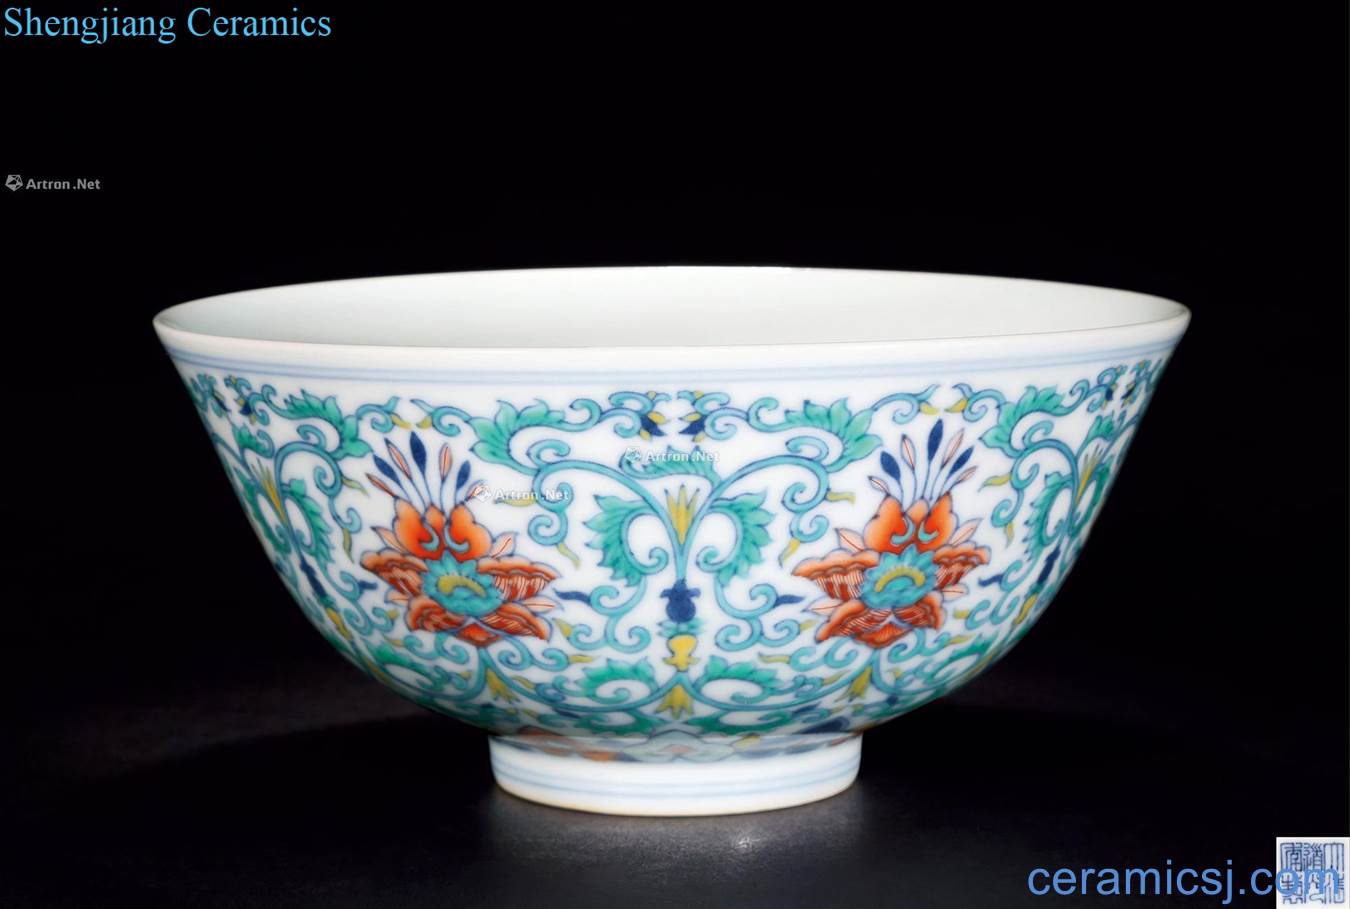 Qing daoguang Dou colors branch passionflower green-splashed bowls